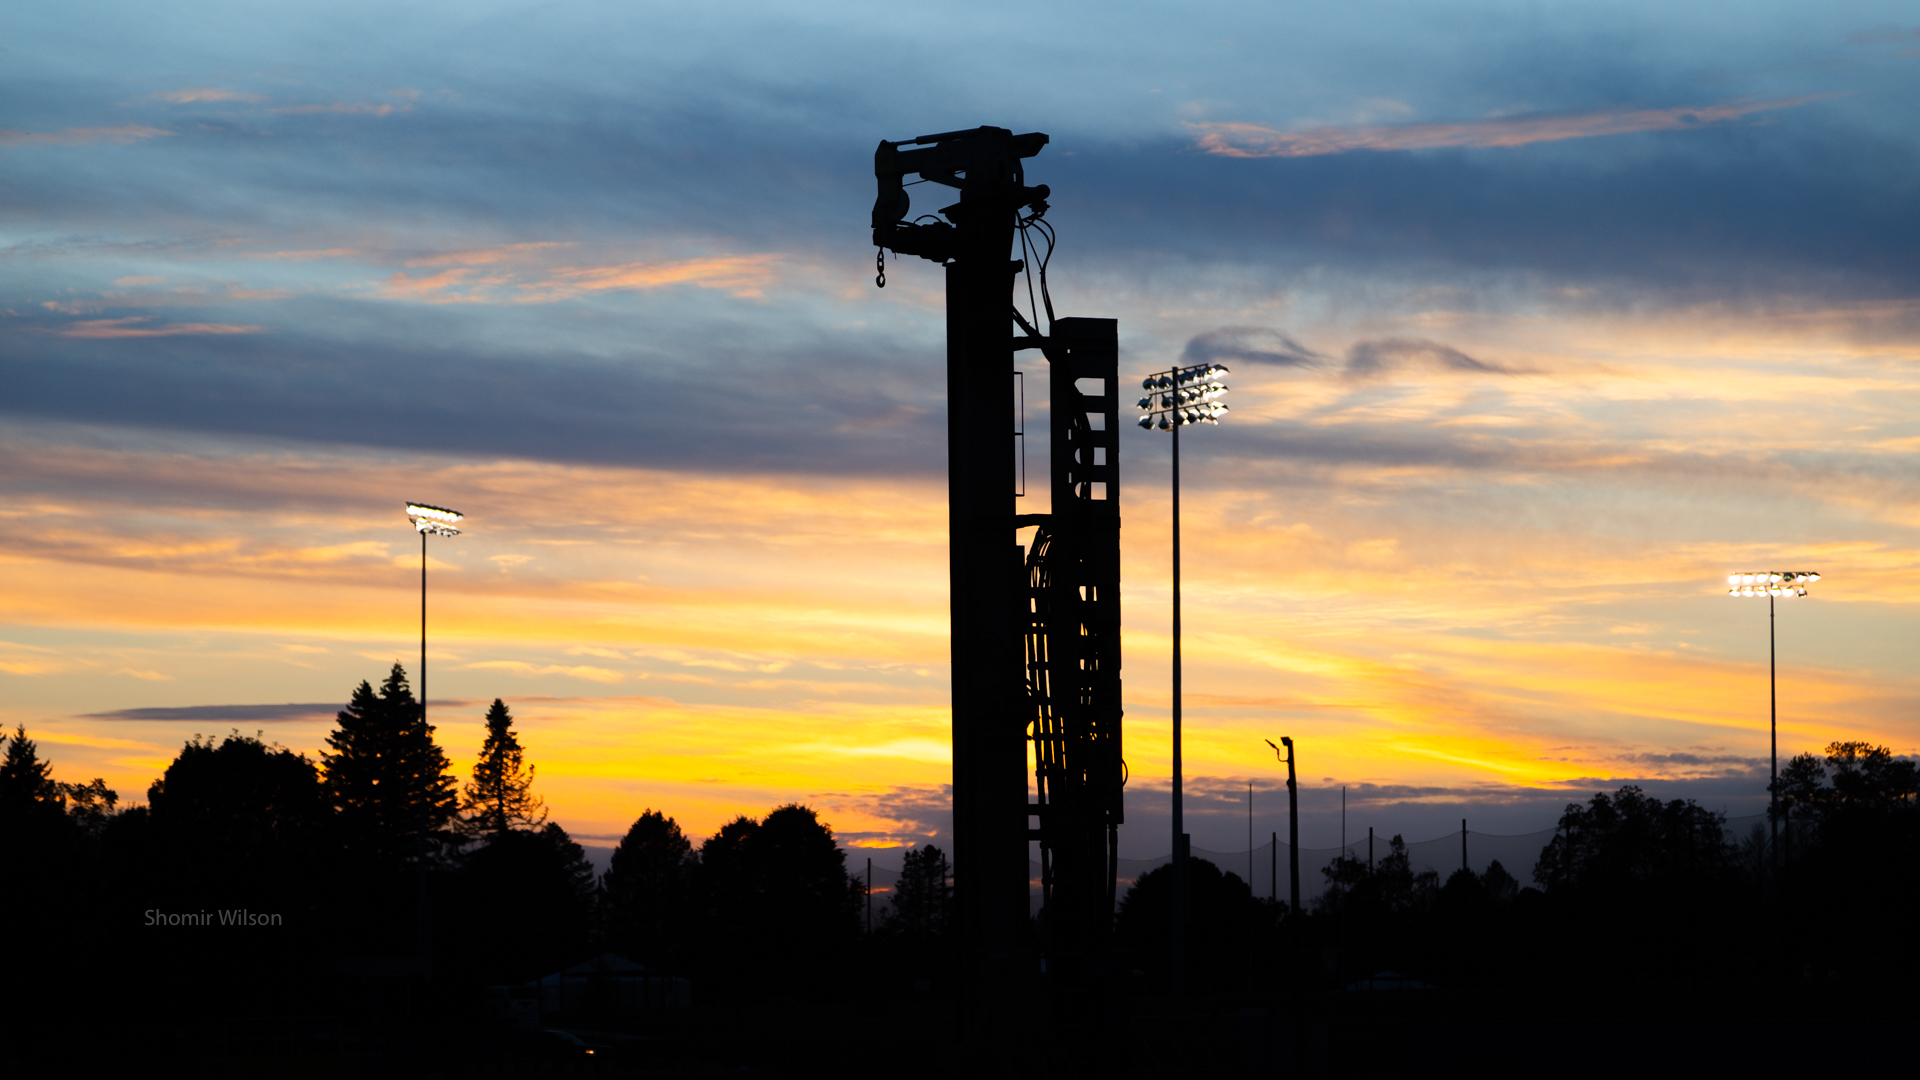 silhouette of a tall pile driver and trees against a sunset in the background